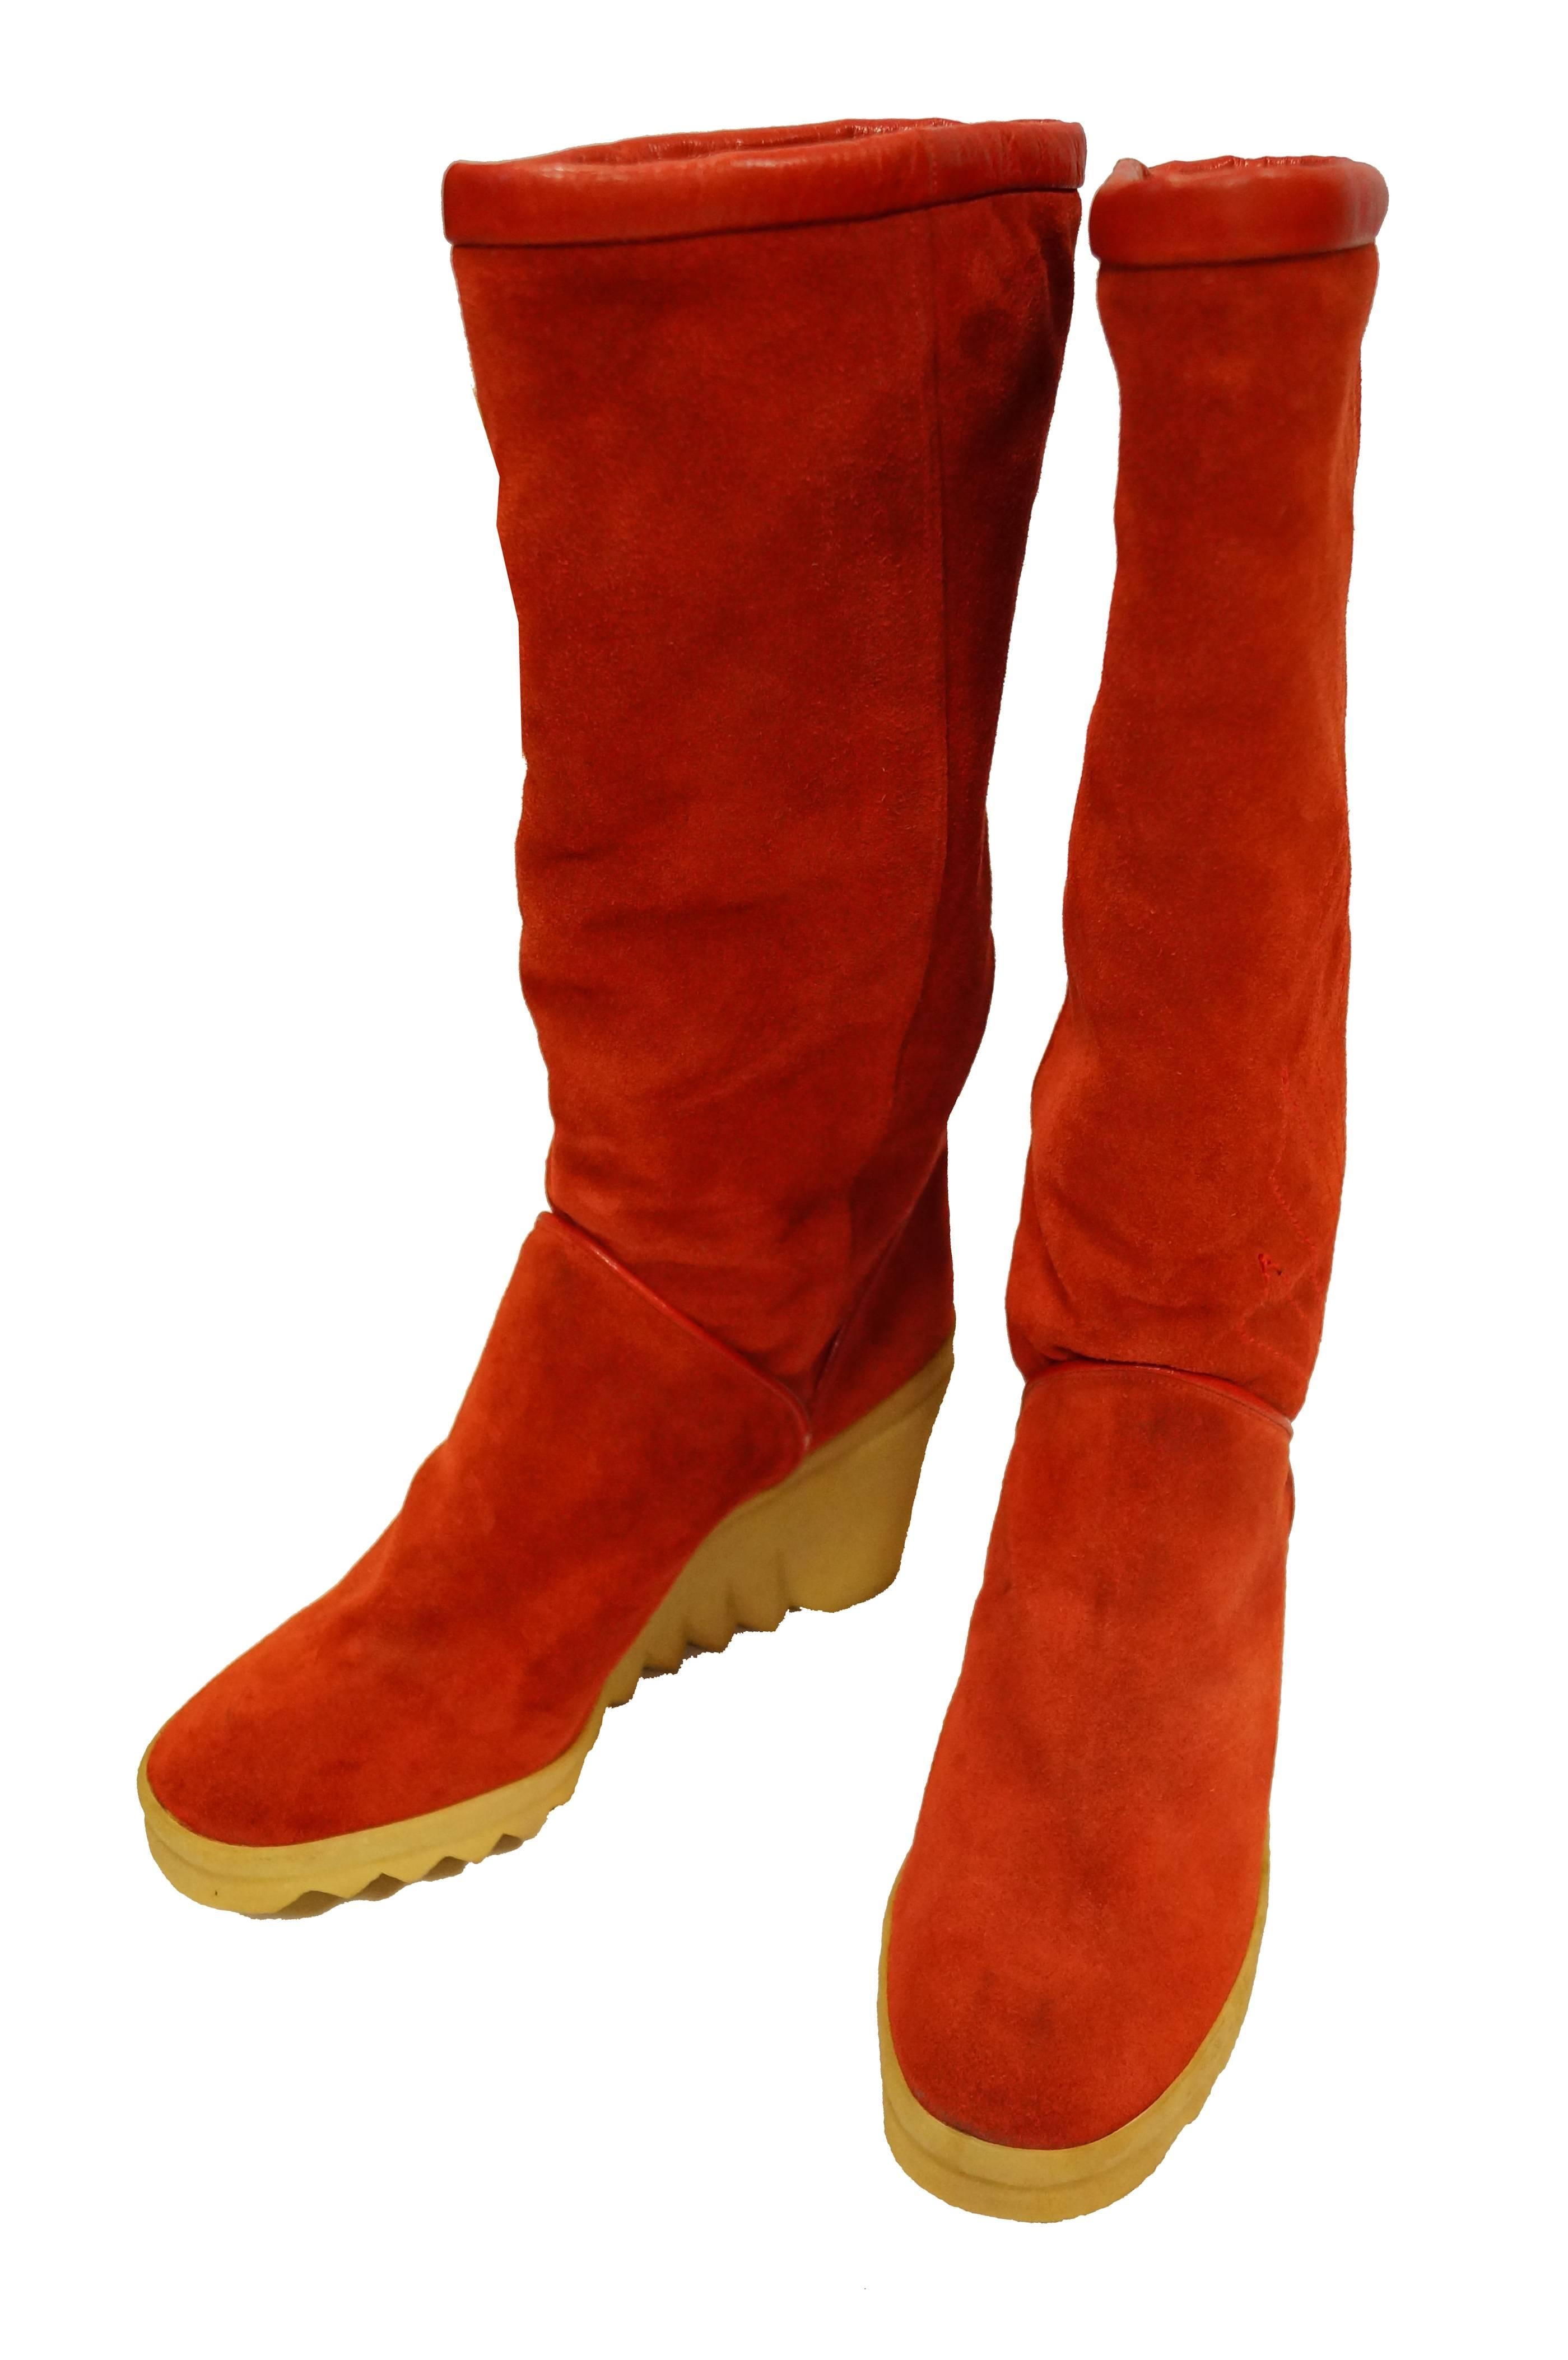 Women's or Men's Charles Jourdan Red Suede Wedge Sunrise Stitch Boots, 1970s For Sale